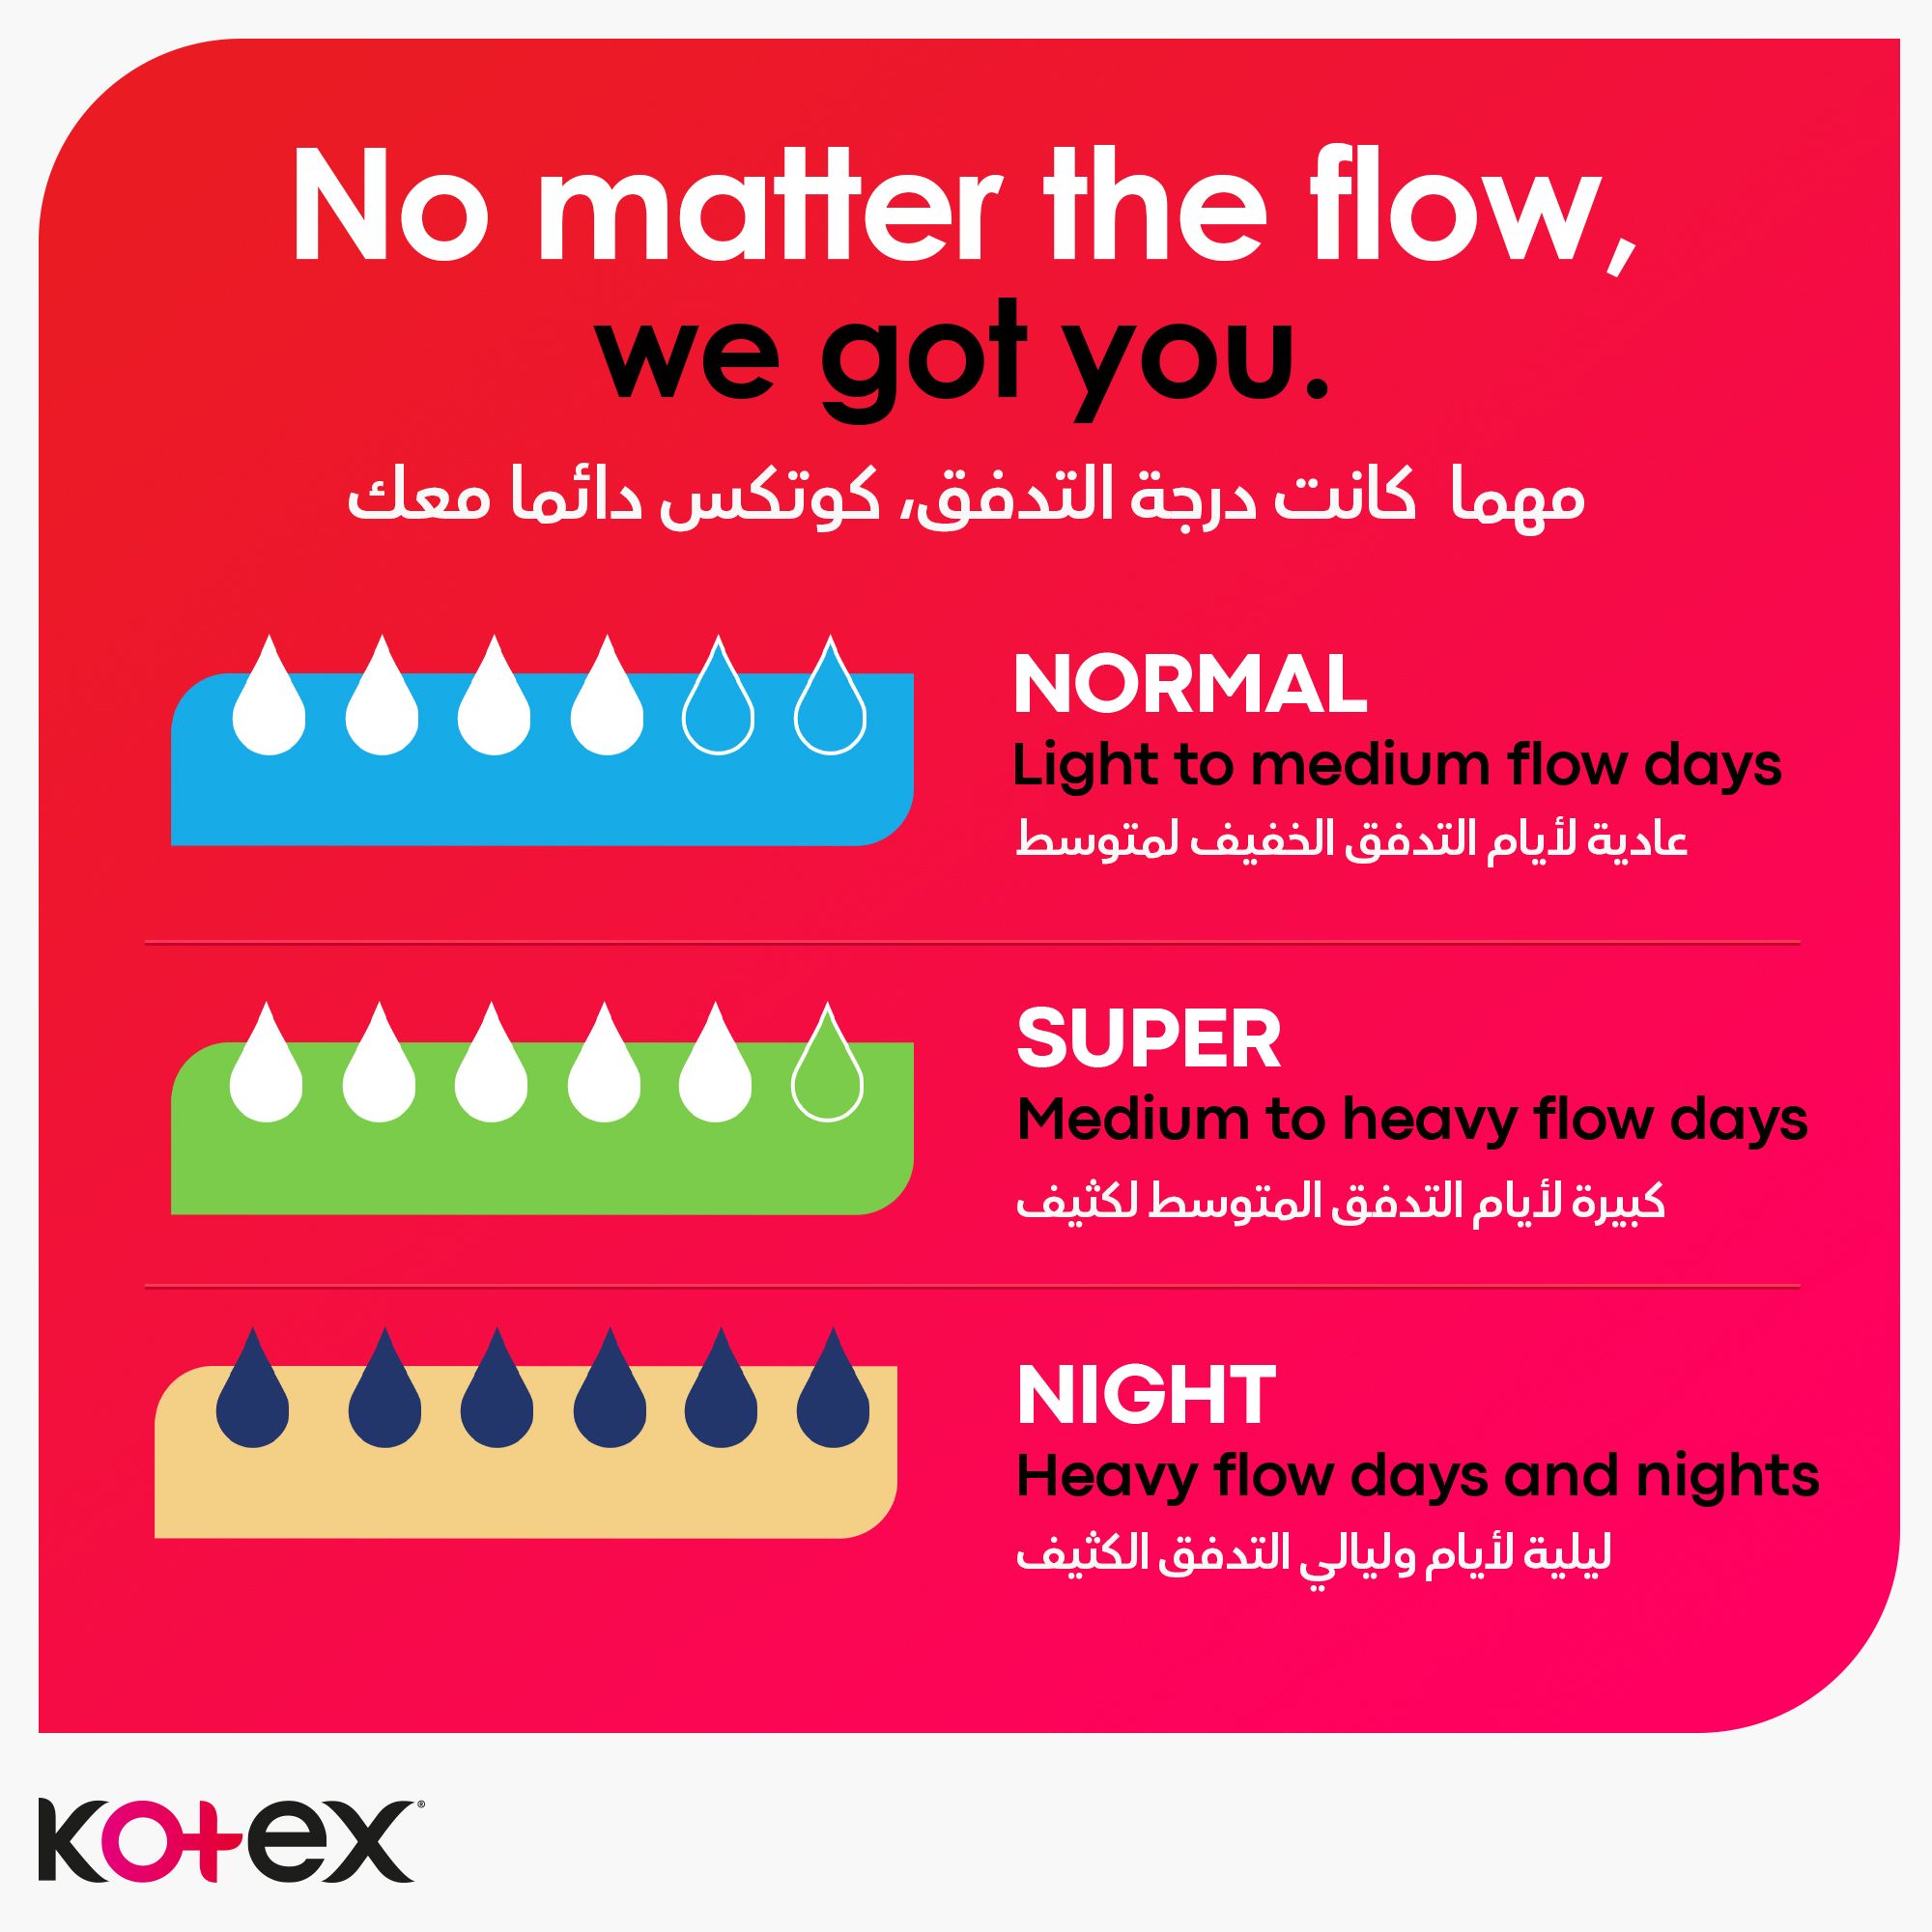 Kotex Maxi Protect Thick Pads, Super Size Sanitary Pads with Wings, 50 Sanitary Pads